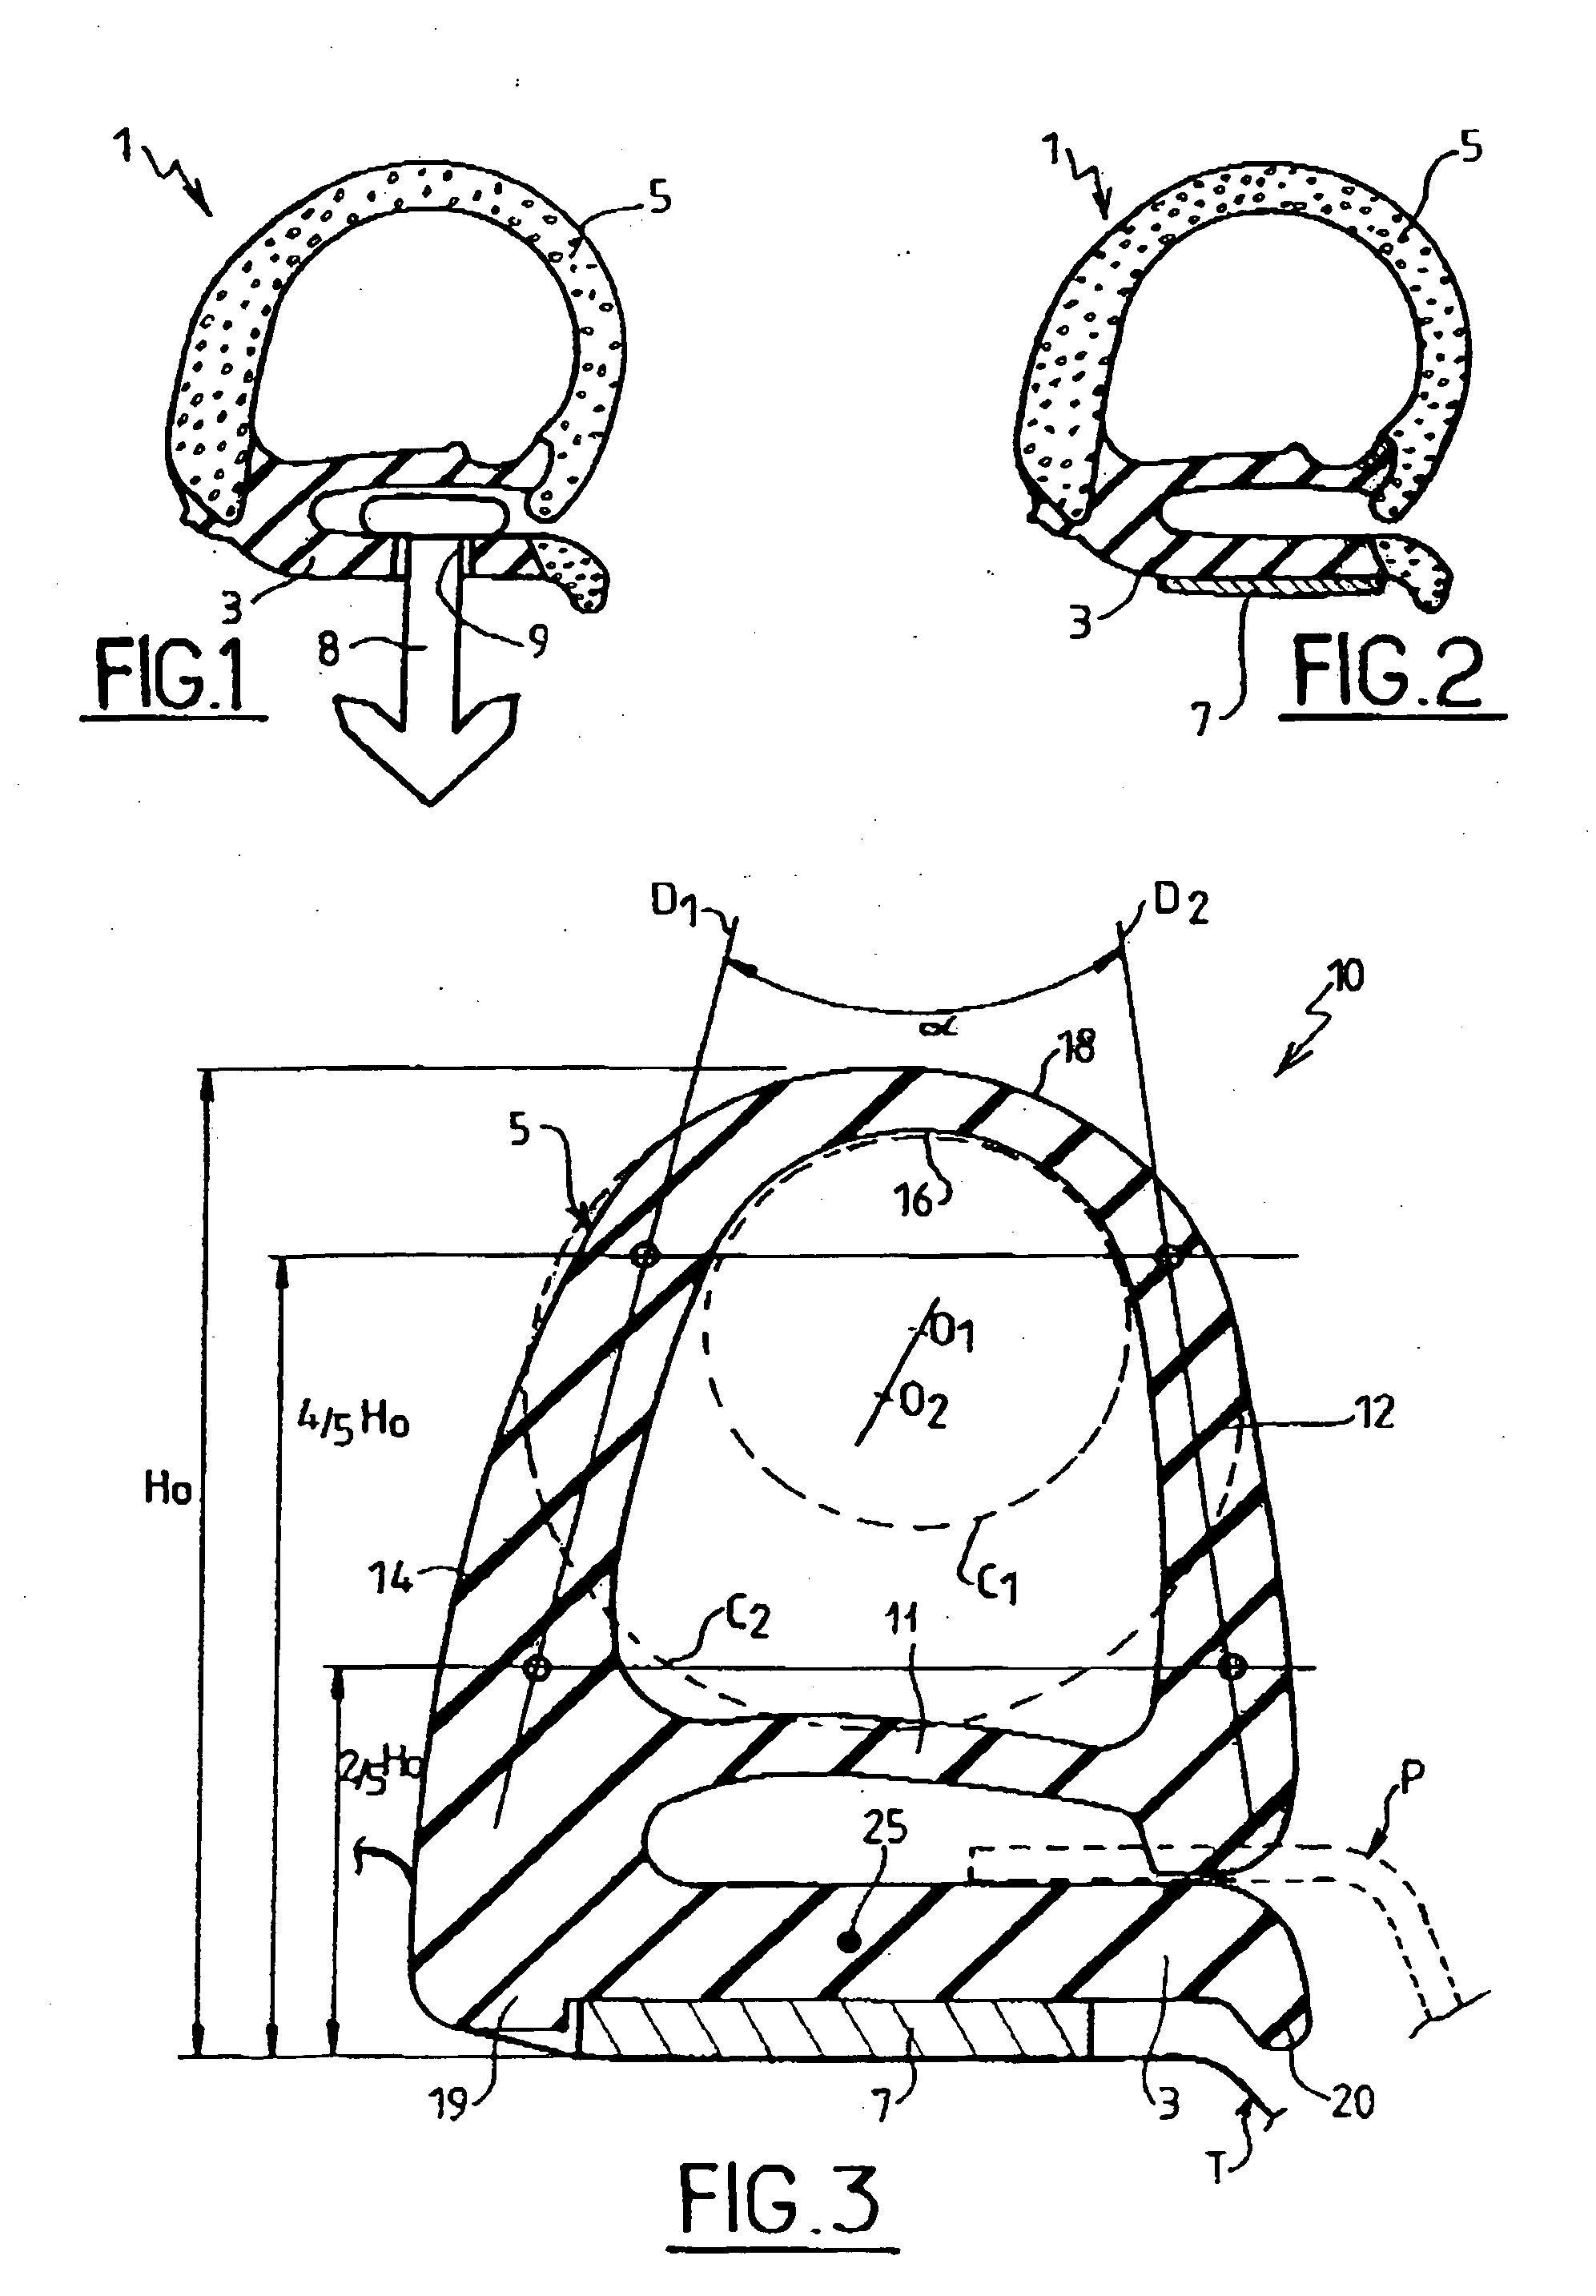 Sealing gasket for mounting on a motor vehicle door that presents at least one corner having a small radius of curvature